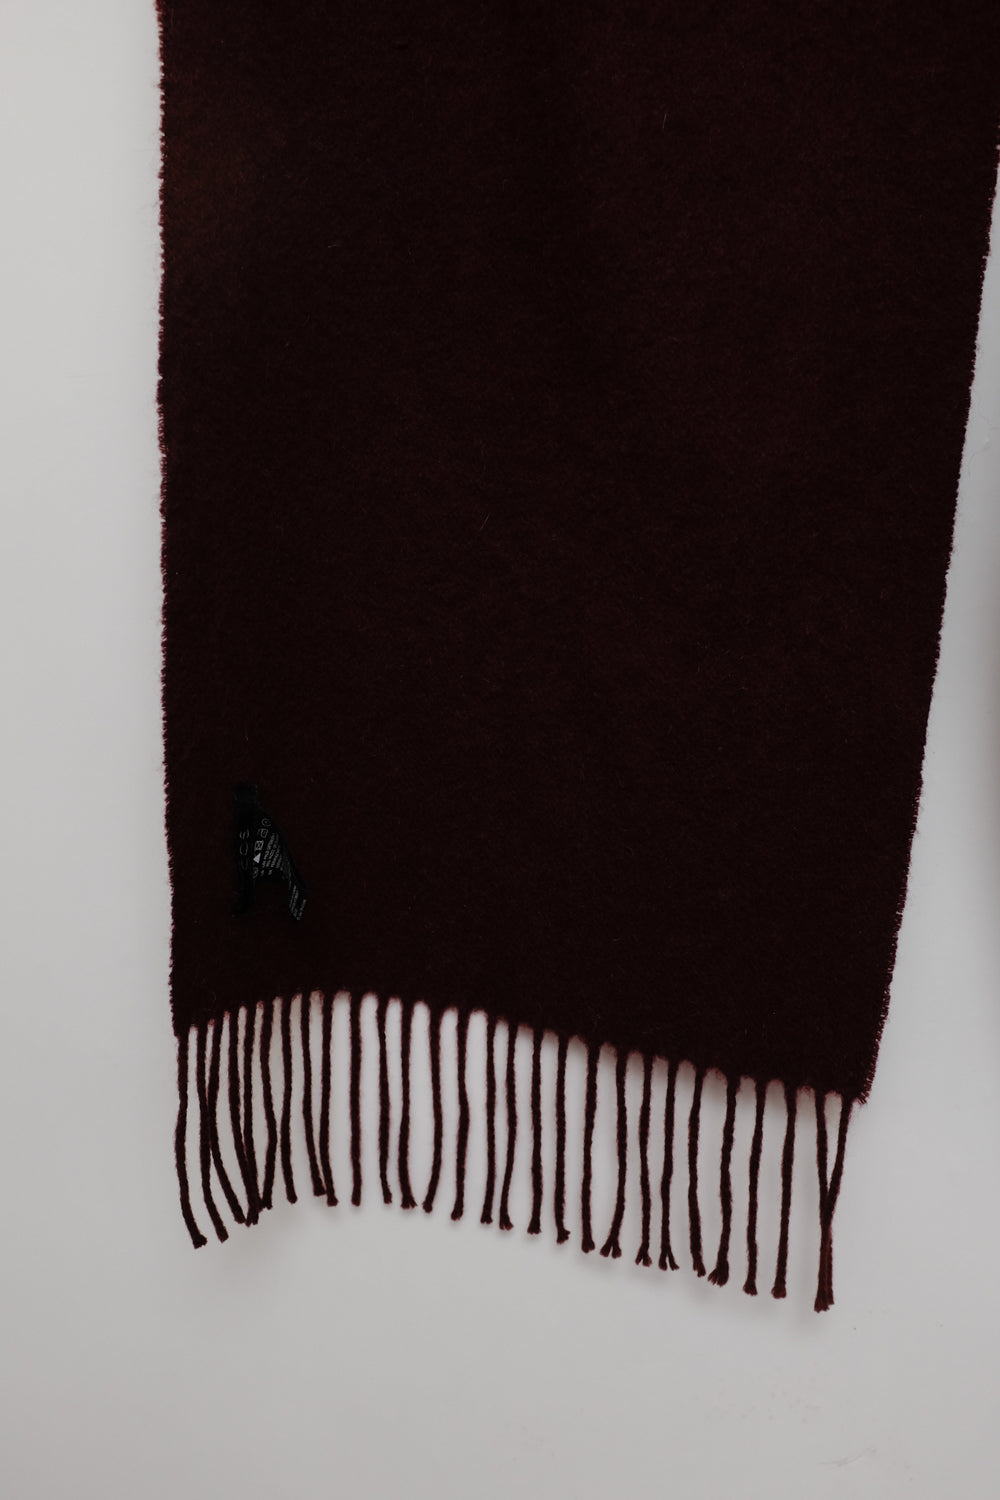 WOOL CASHMERE COS WINE RED SCARF